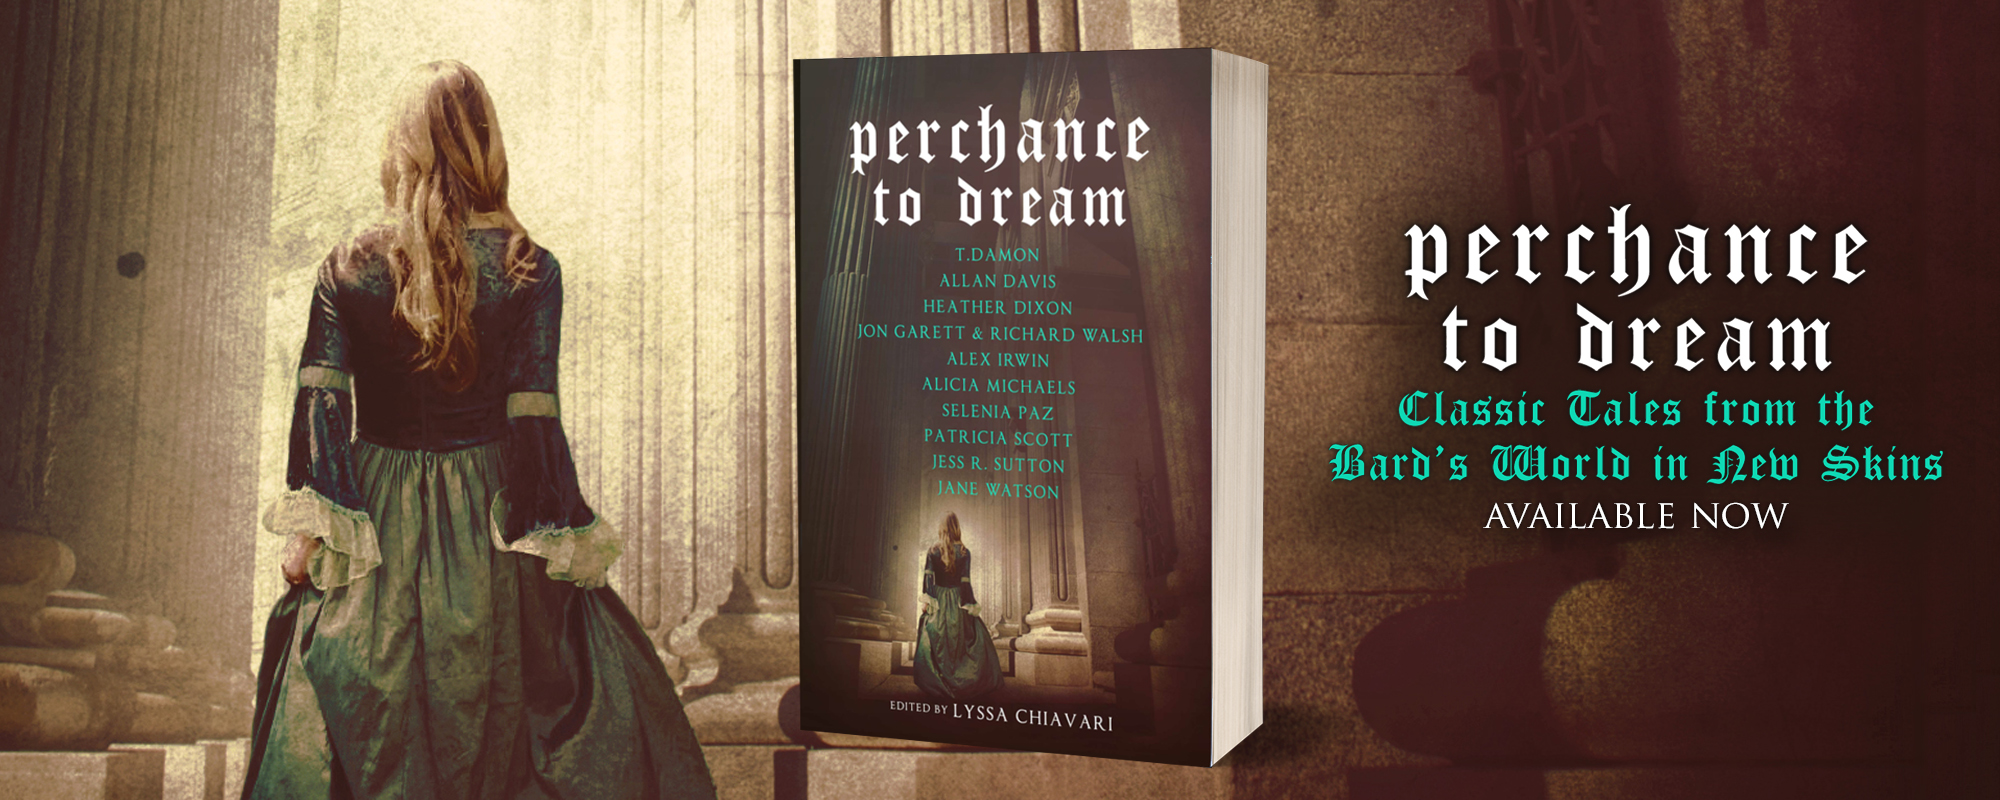 Perchance to Dream edited by Lyssa Chiavari, available now